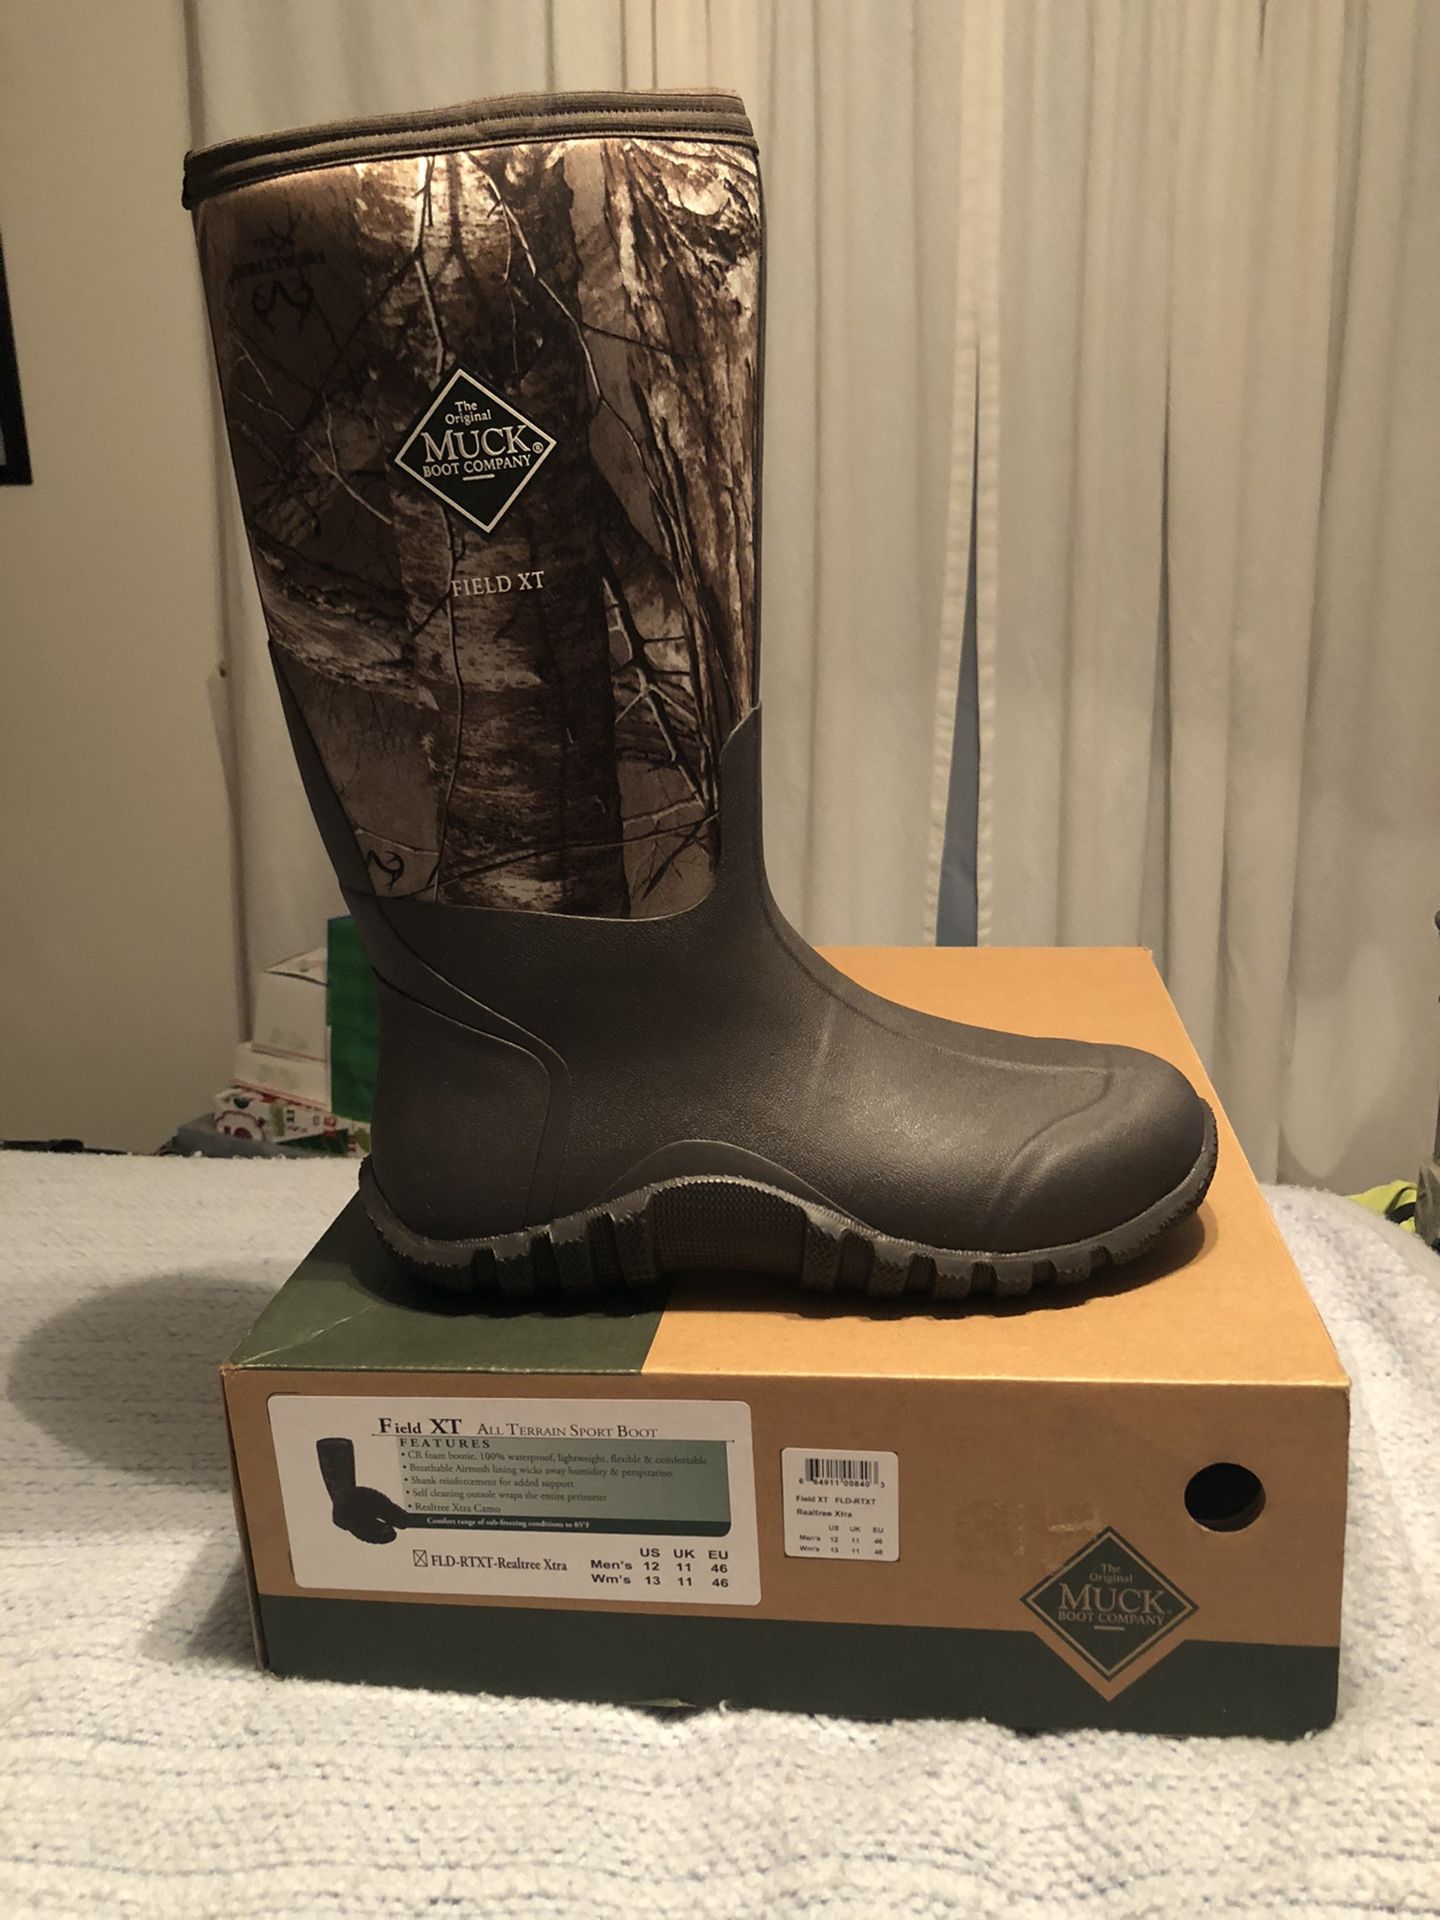 Hunting/Work boots